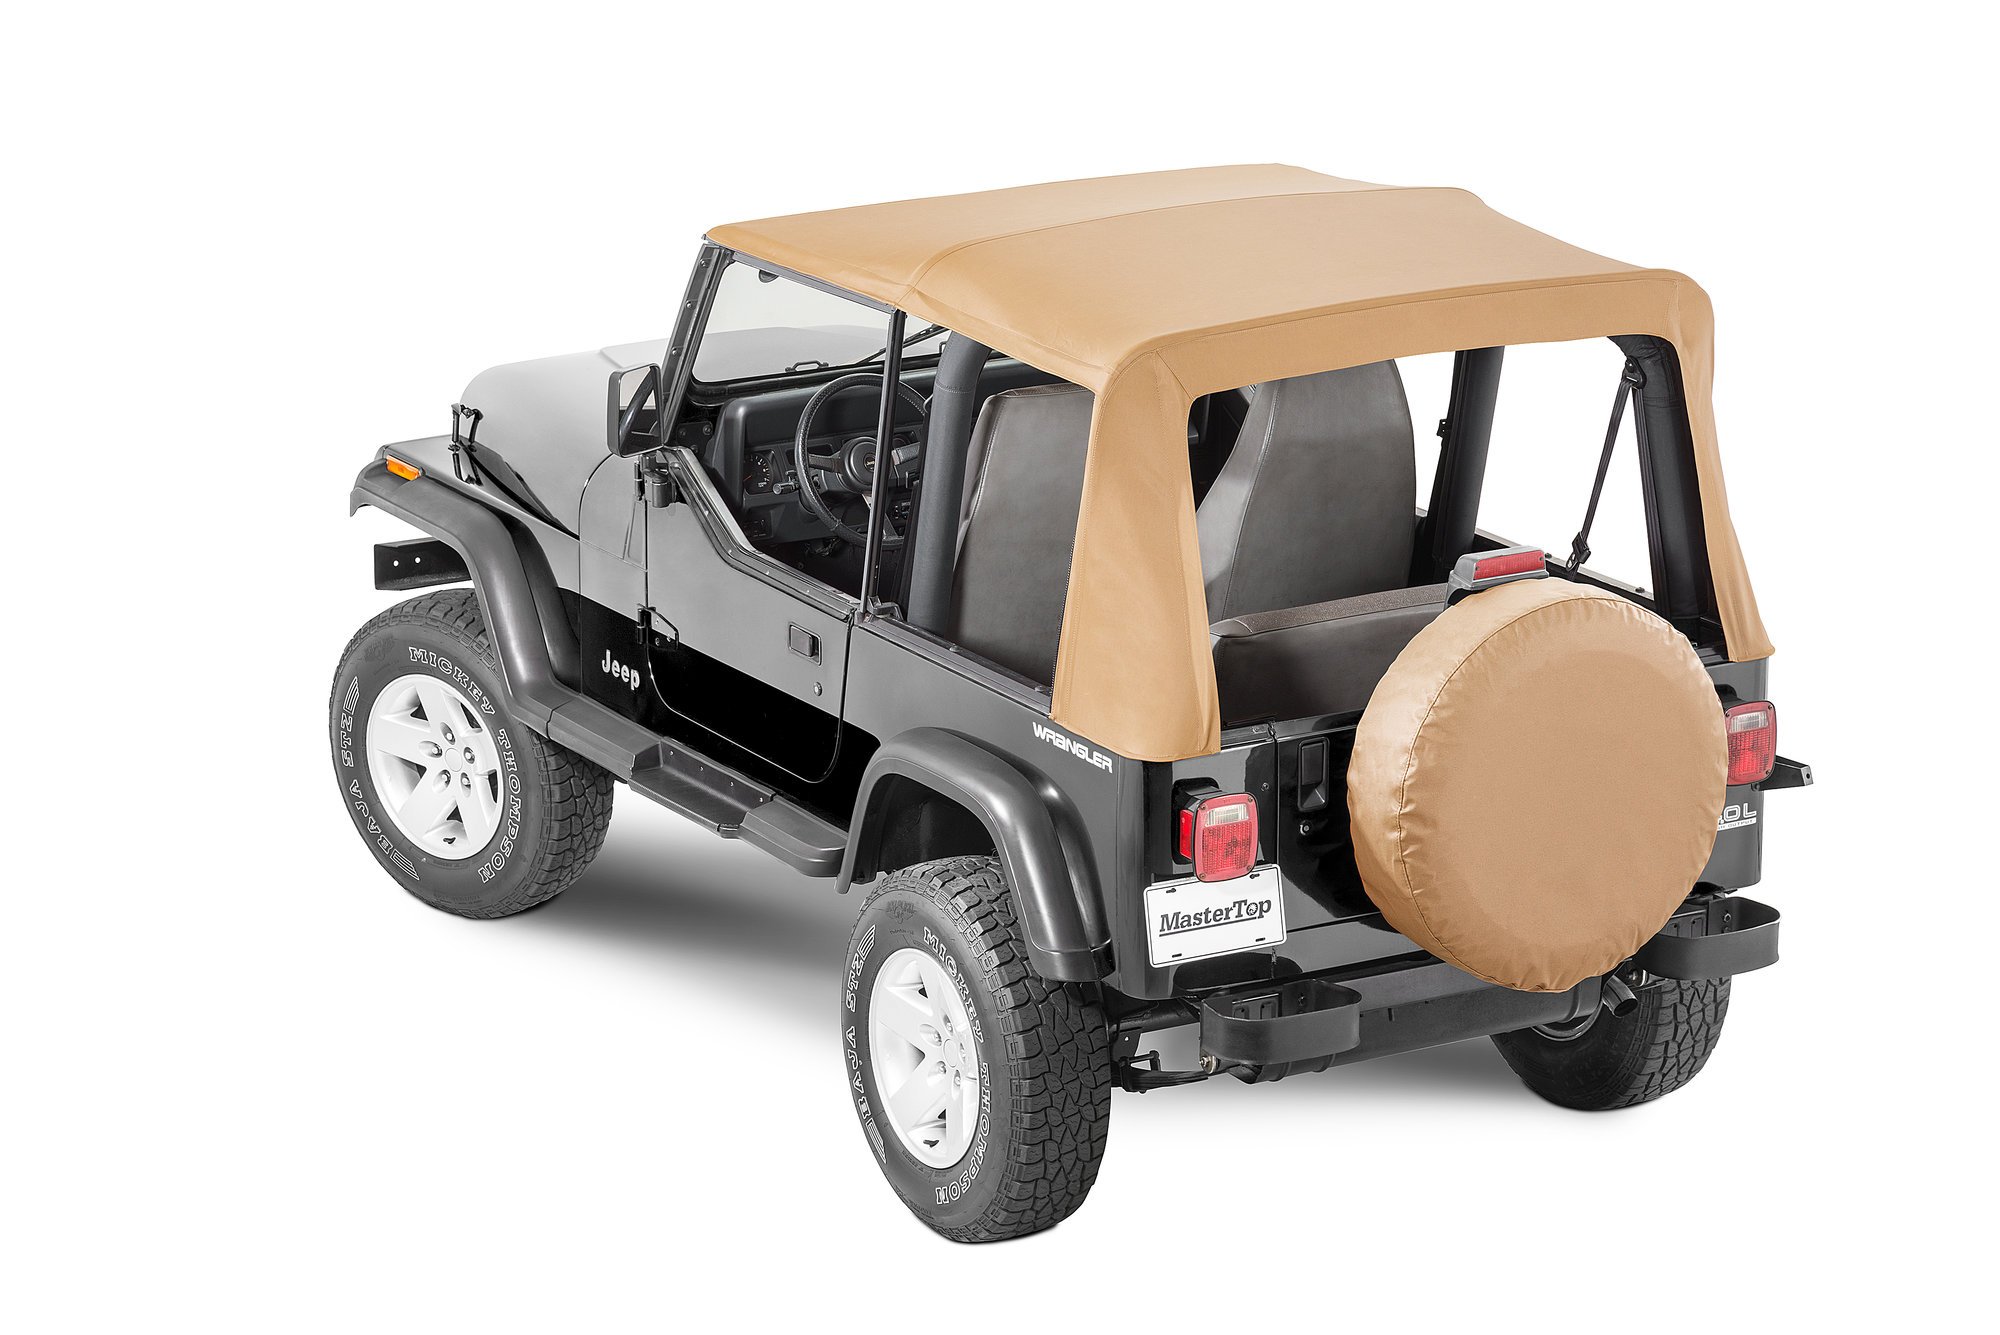 MasterTop Premium Replacement Soft Top with Tinted Windows for 88-95 Jeep  Wrangler YJ | Quadratec